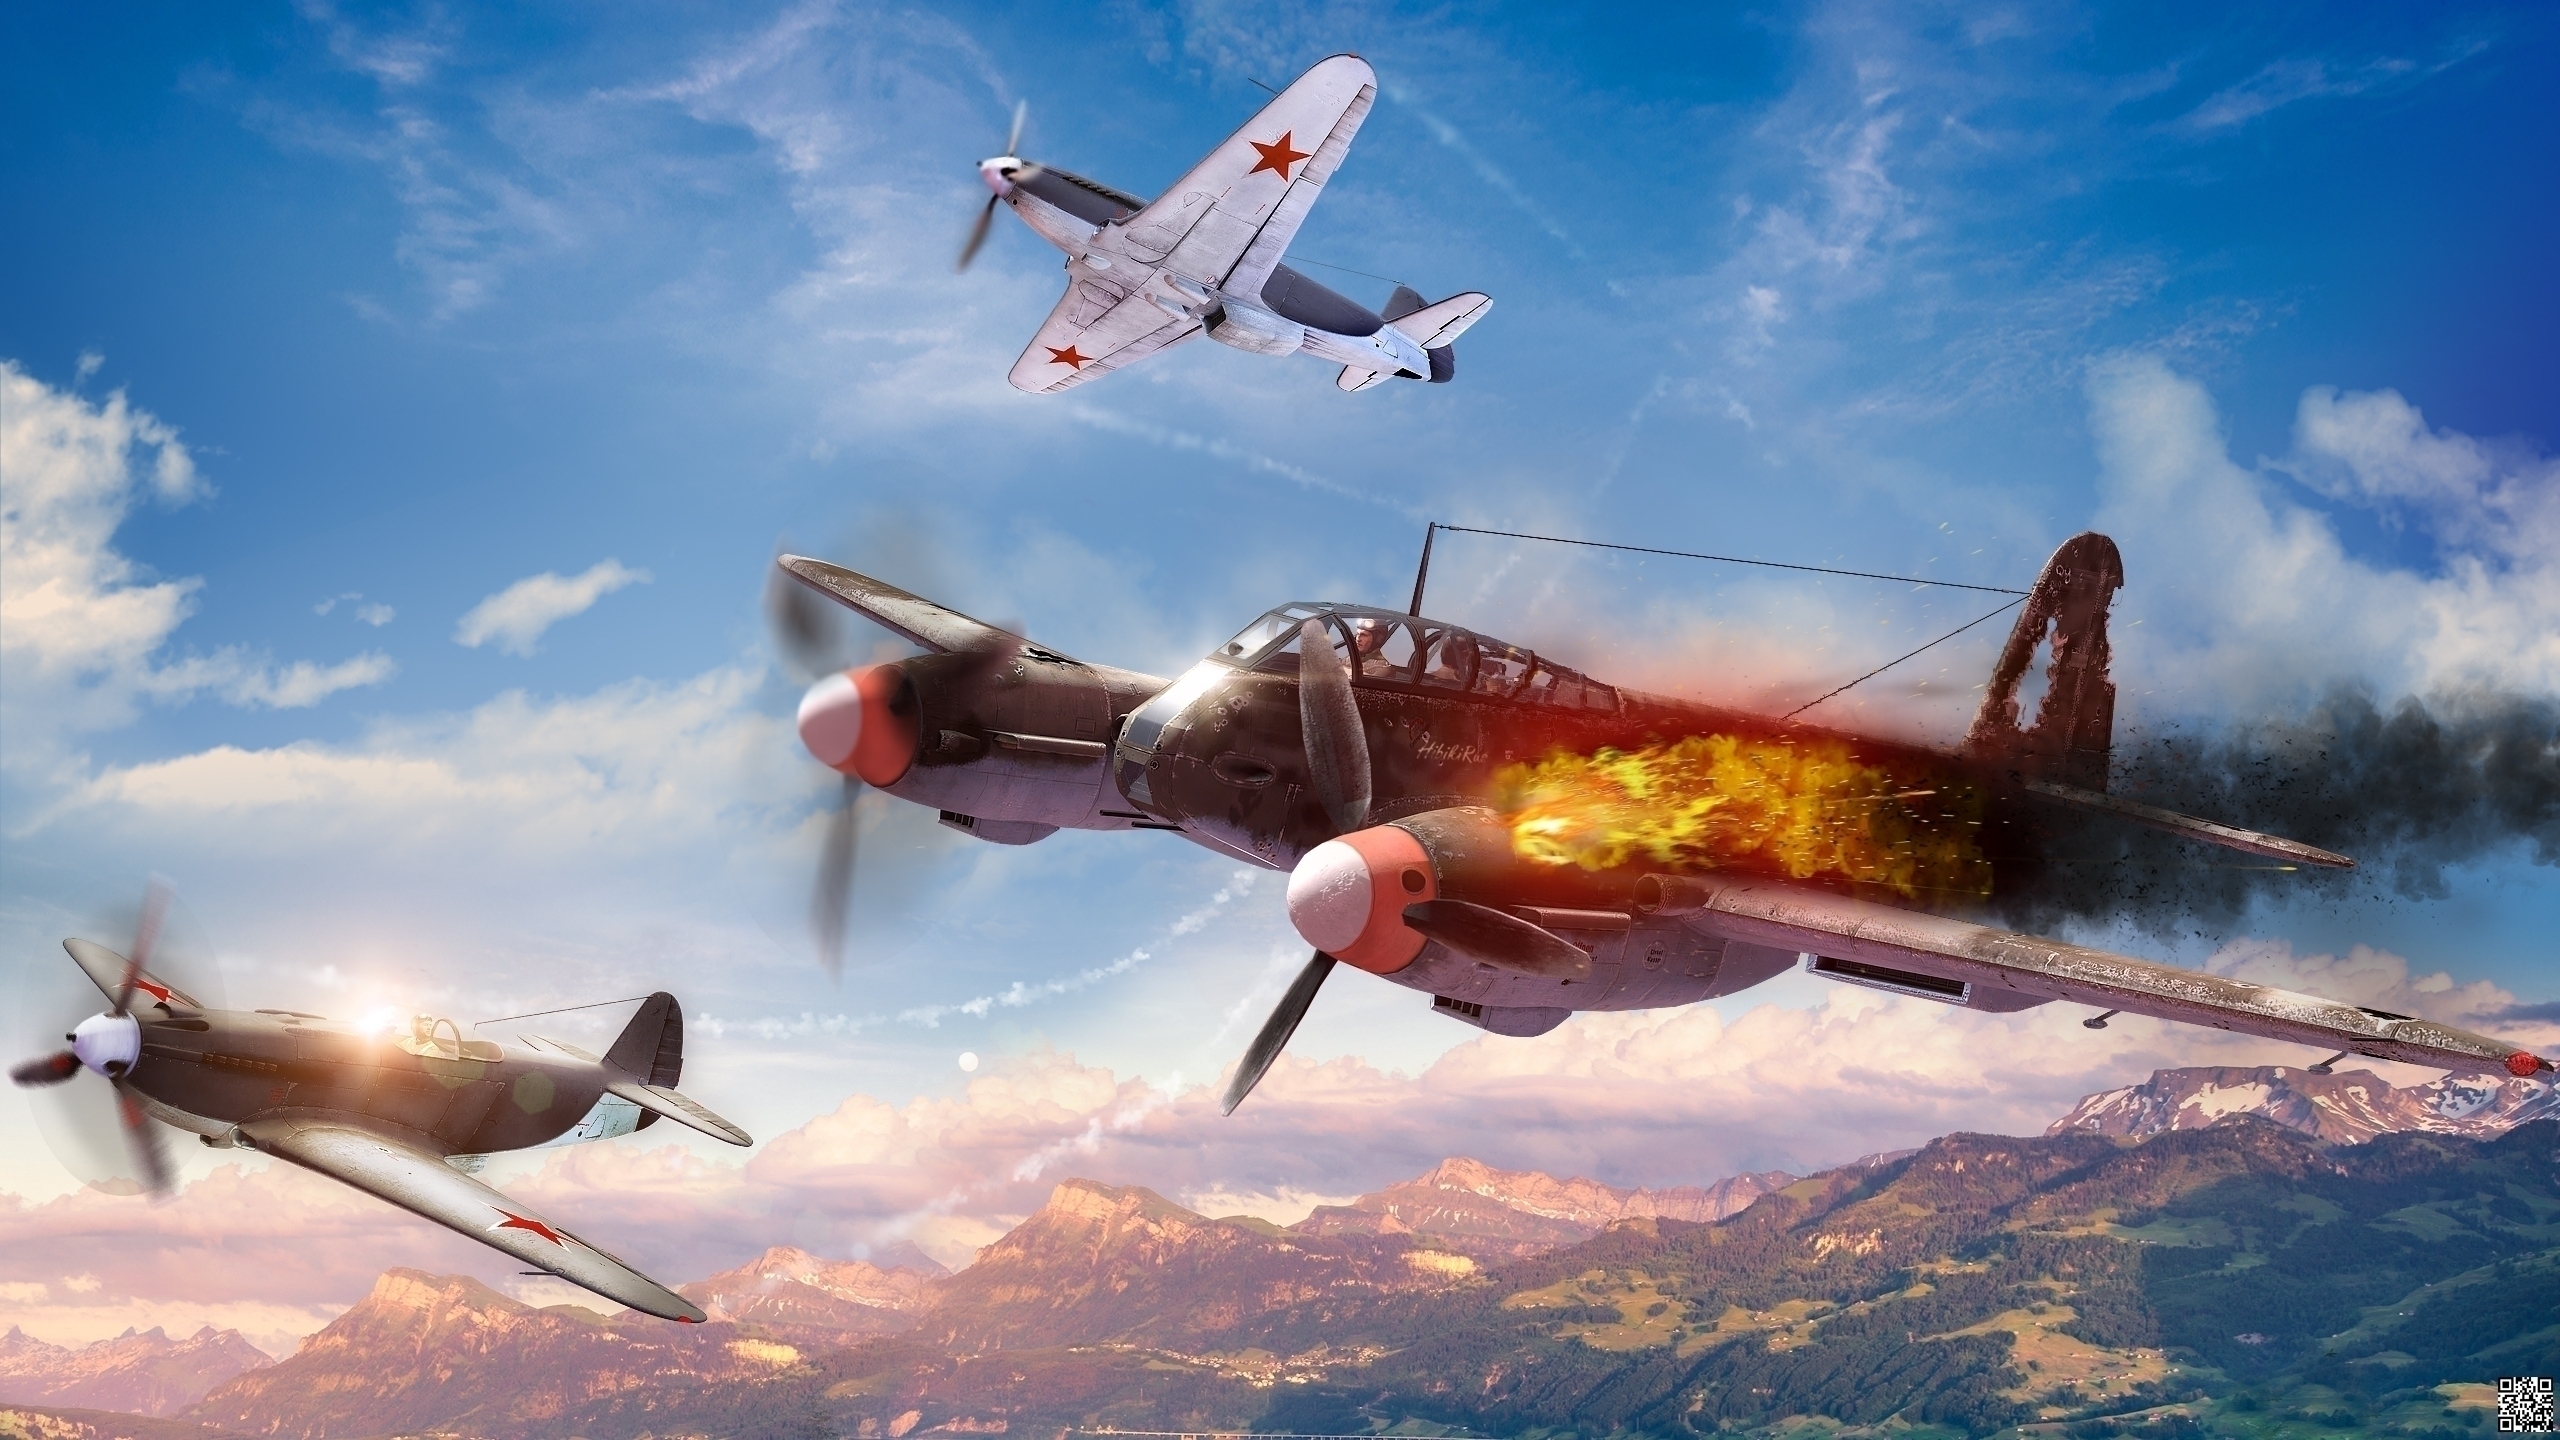 War Thunder Wallpapers HD War Thunder Backgrounds Free Images Download